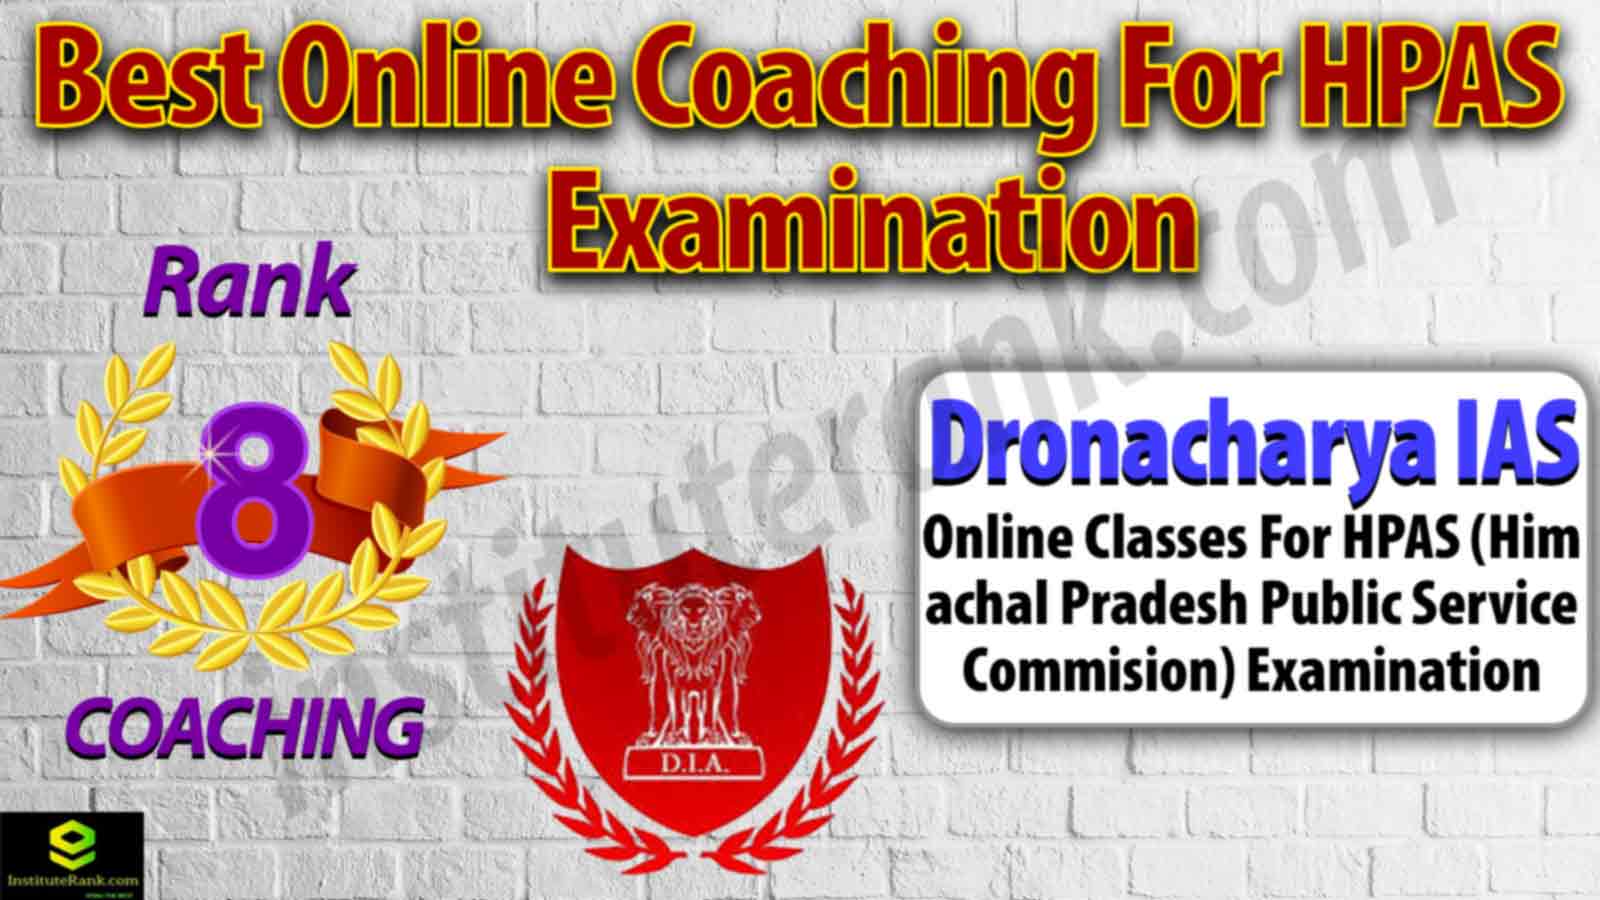 Top Online Coaching for HPAS Exam Preparation